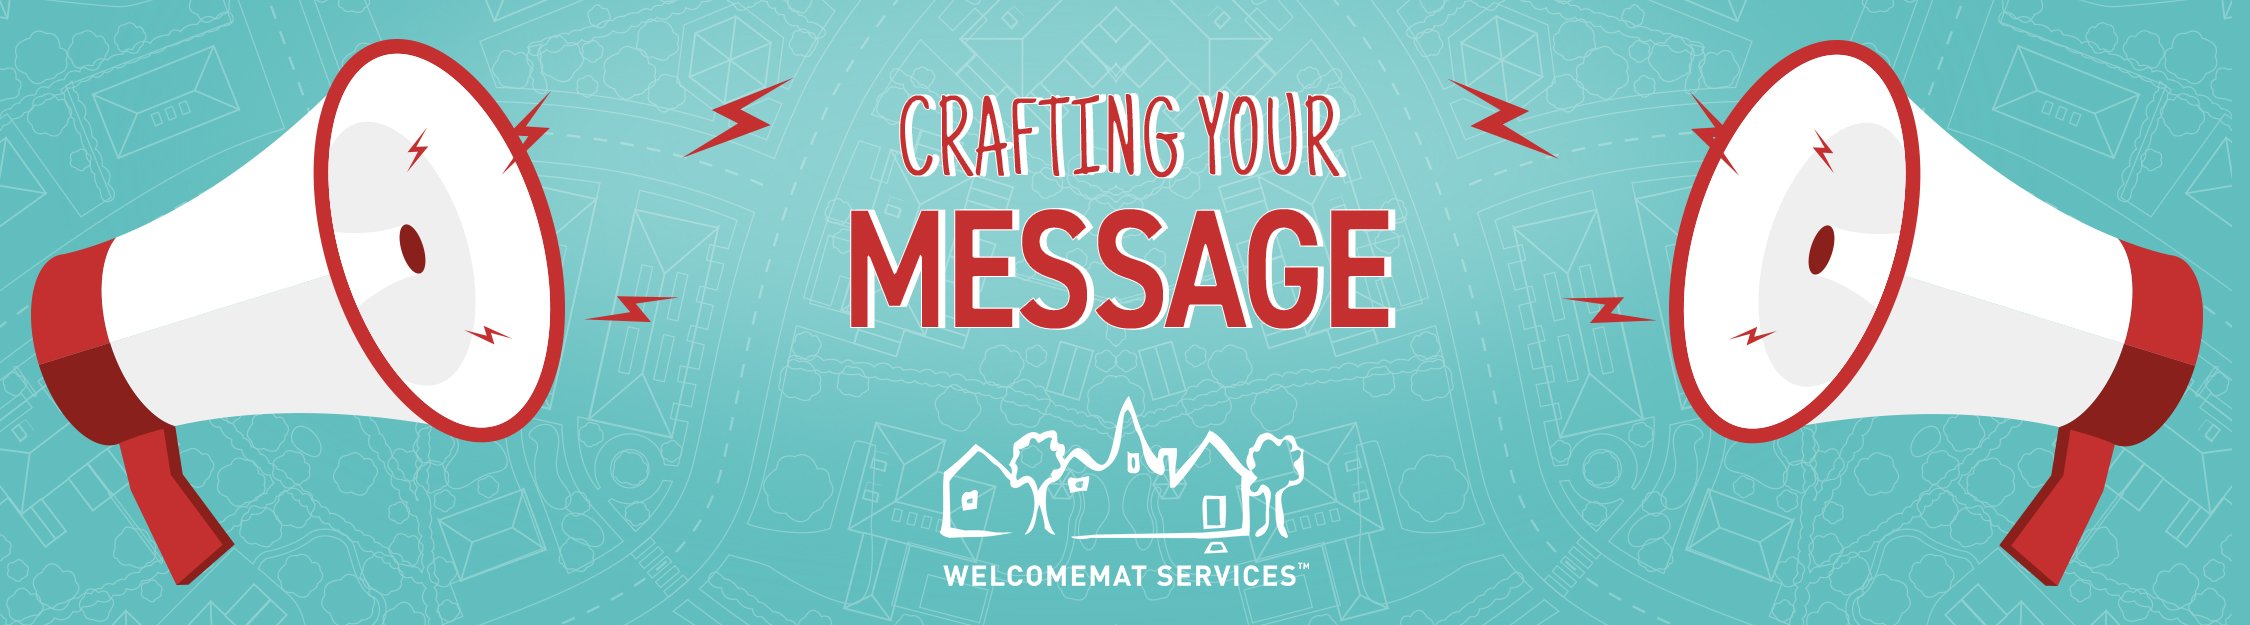 crafting-your-message-blog